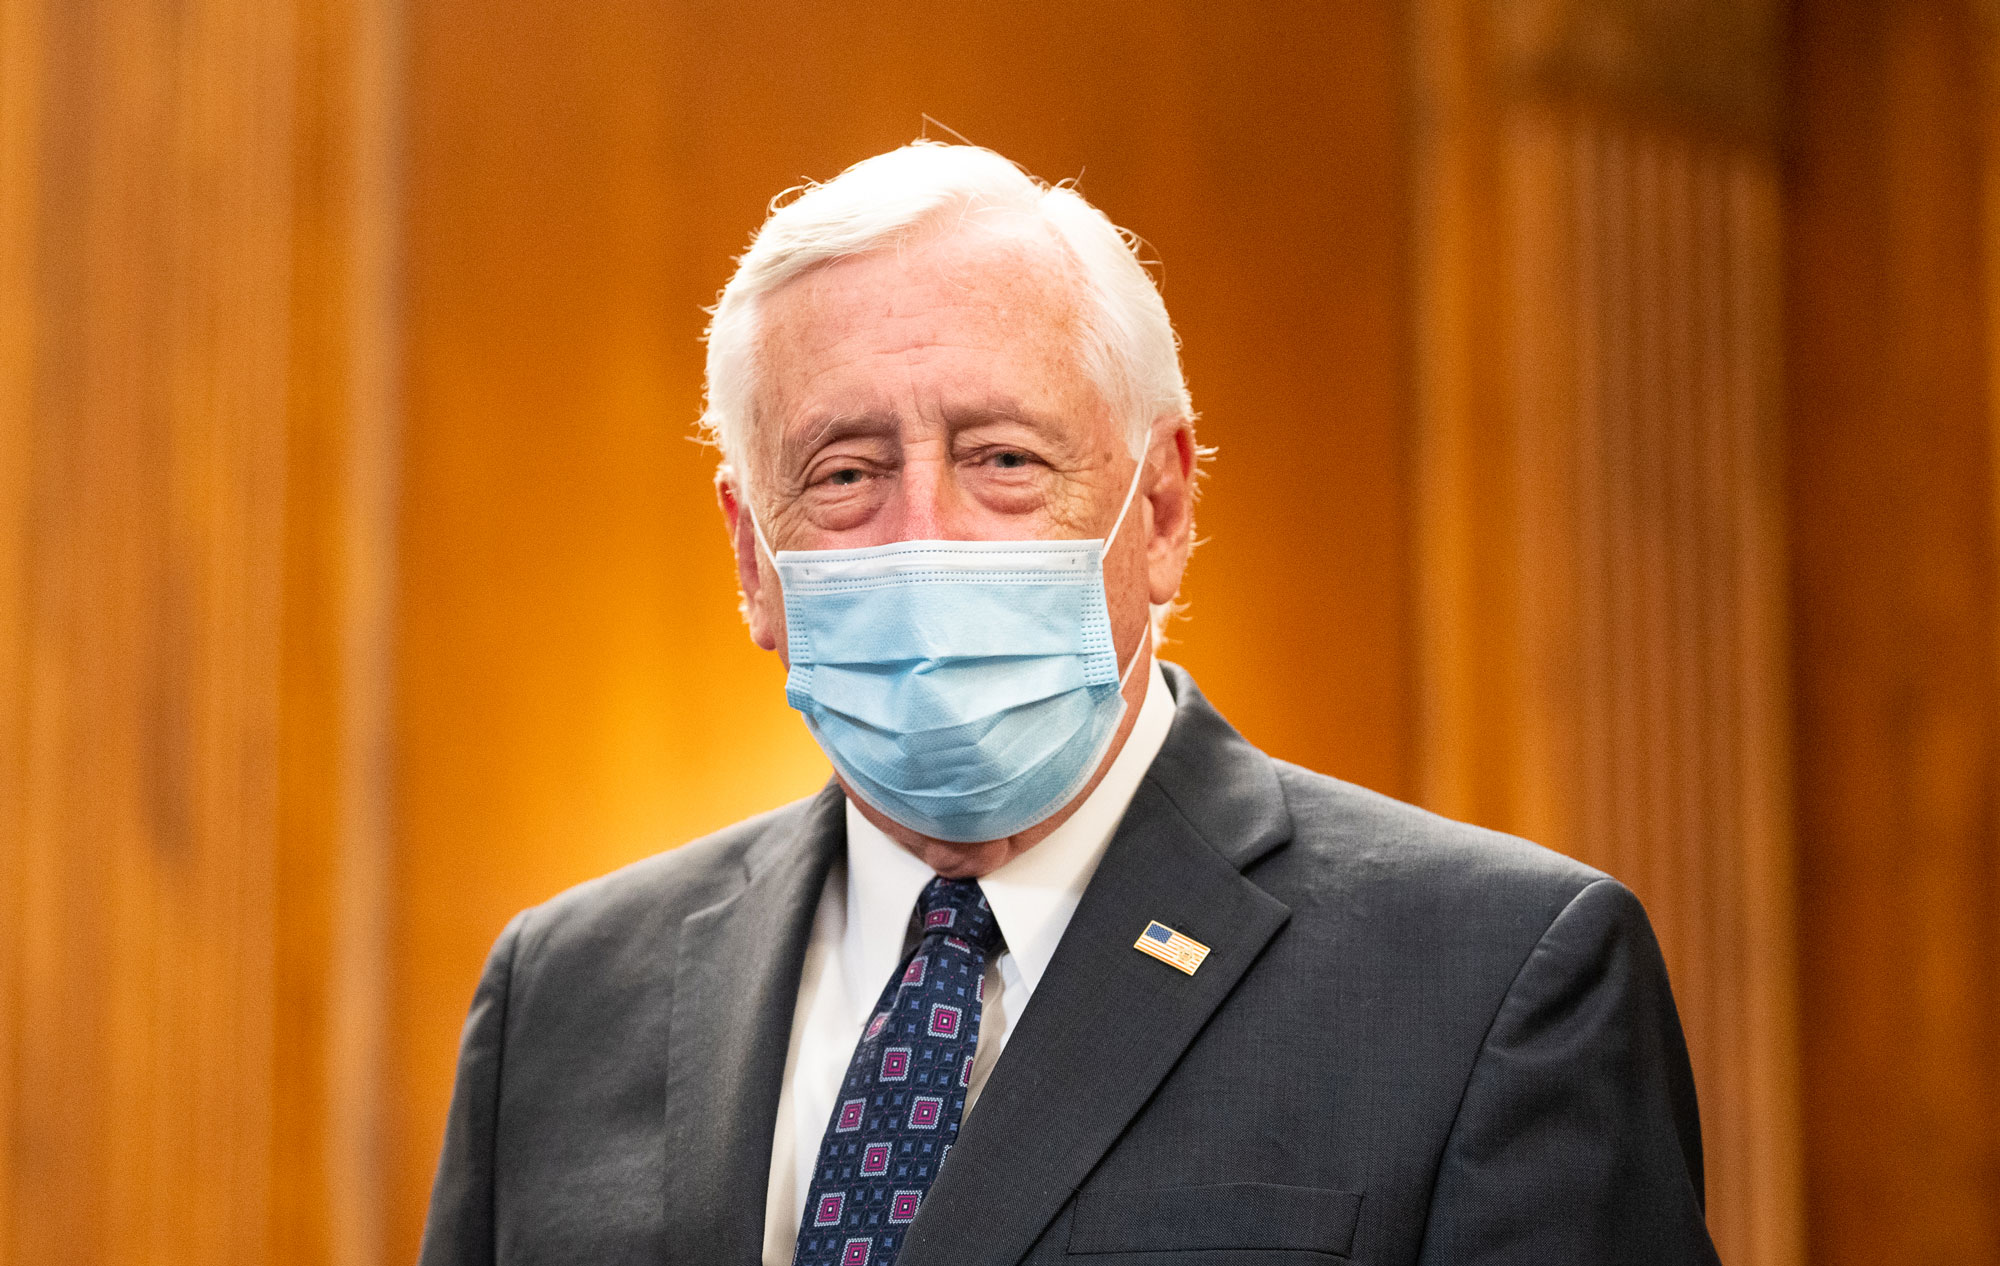 U.S. Representative, Steny Hoyer (D-MD) wears a face mask at the ceremonial swearing in of Representative Elect Kweisi Mfume (D-MD).